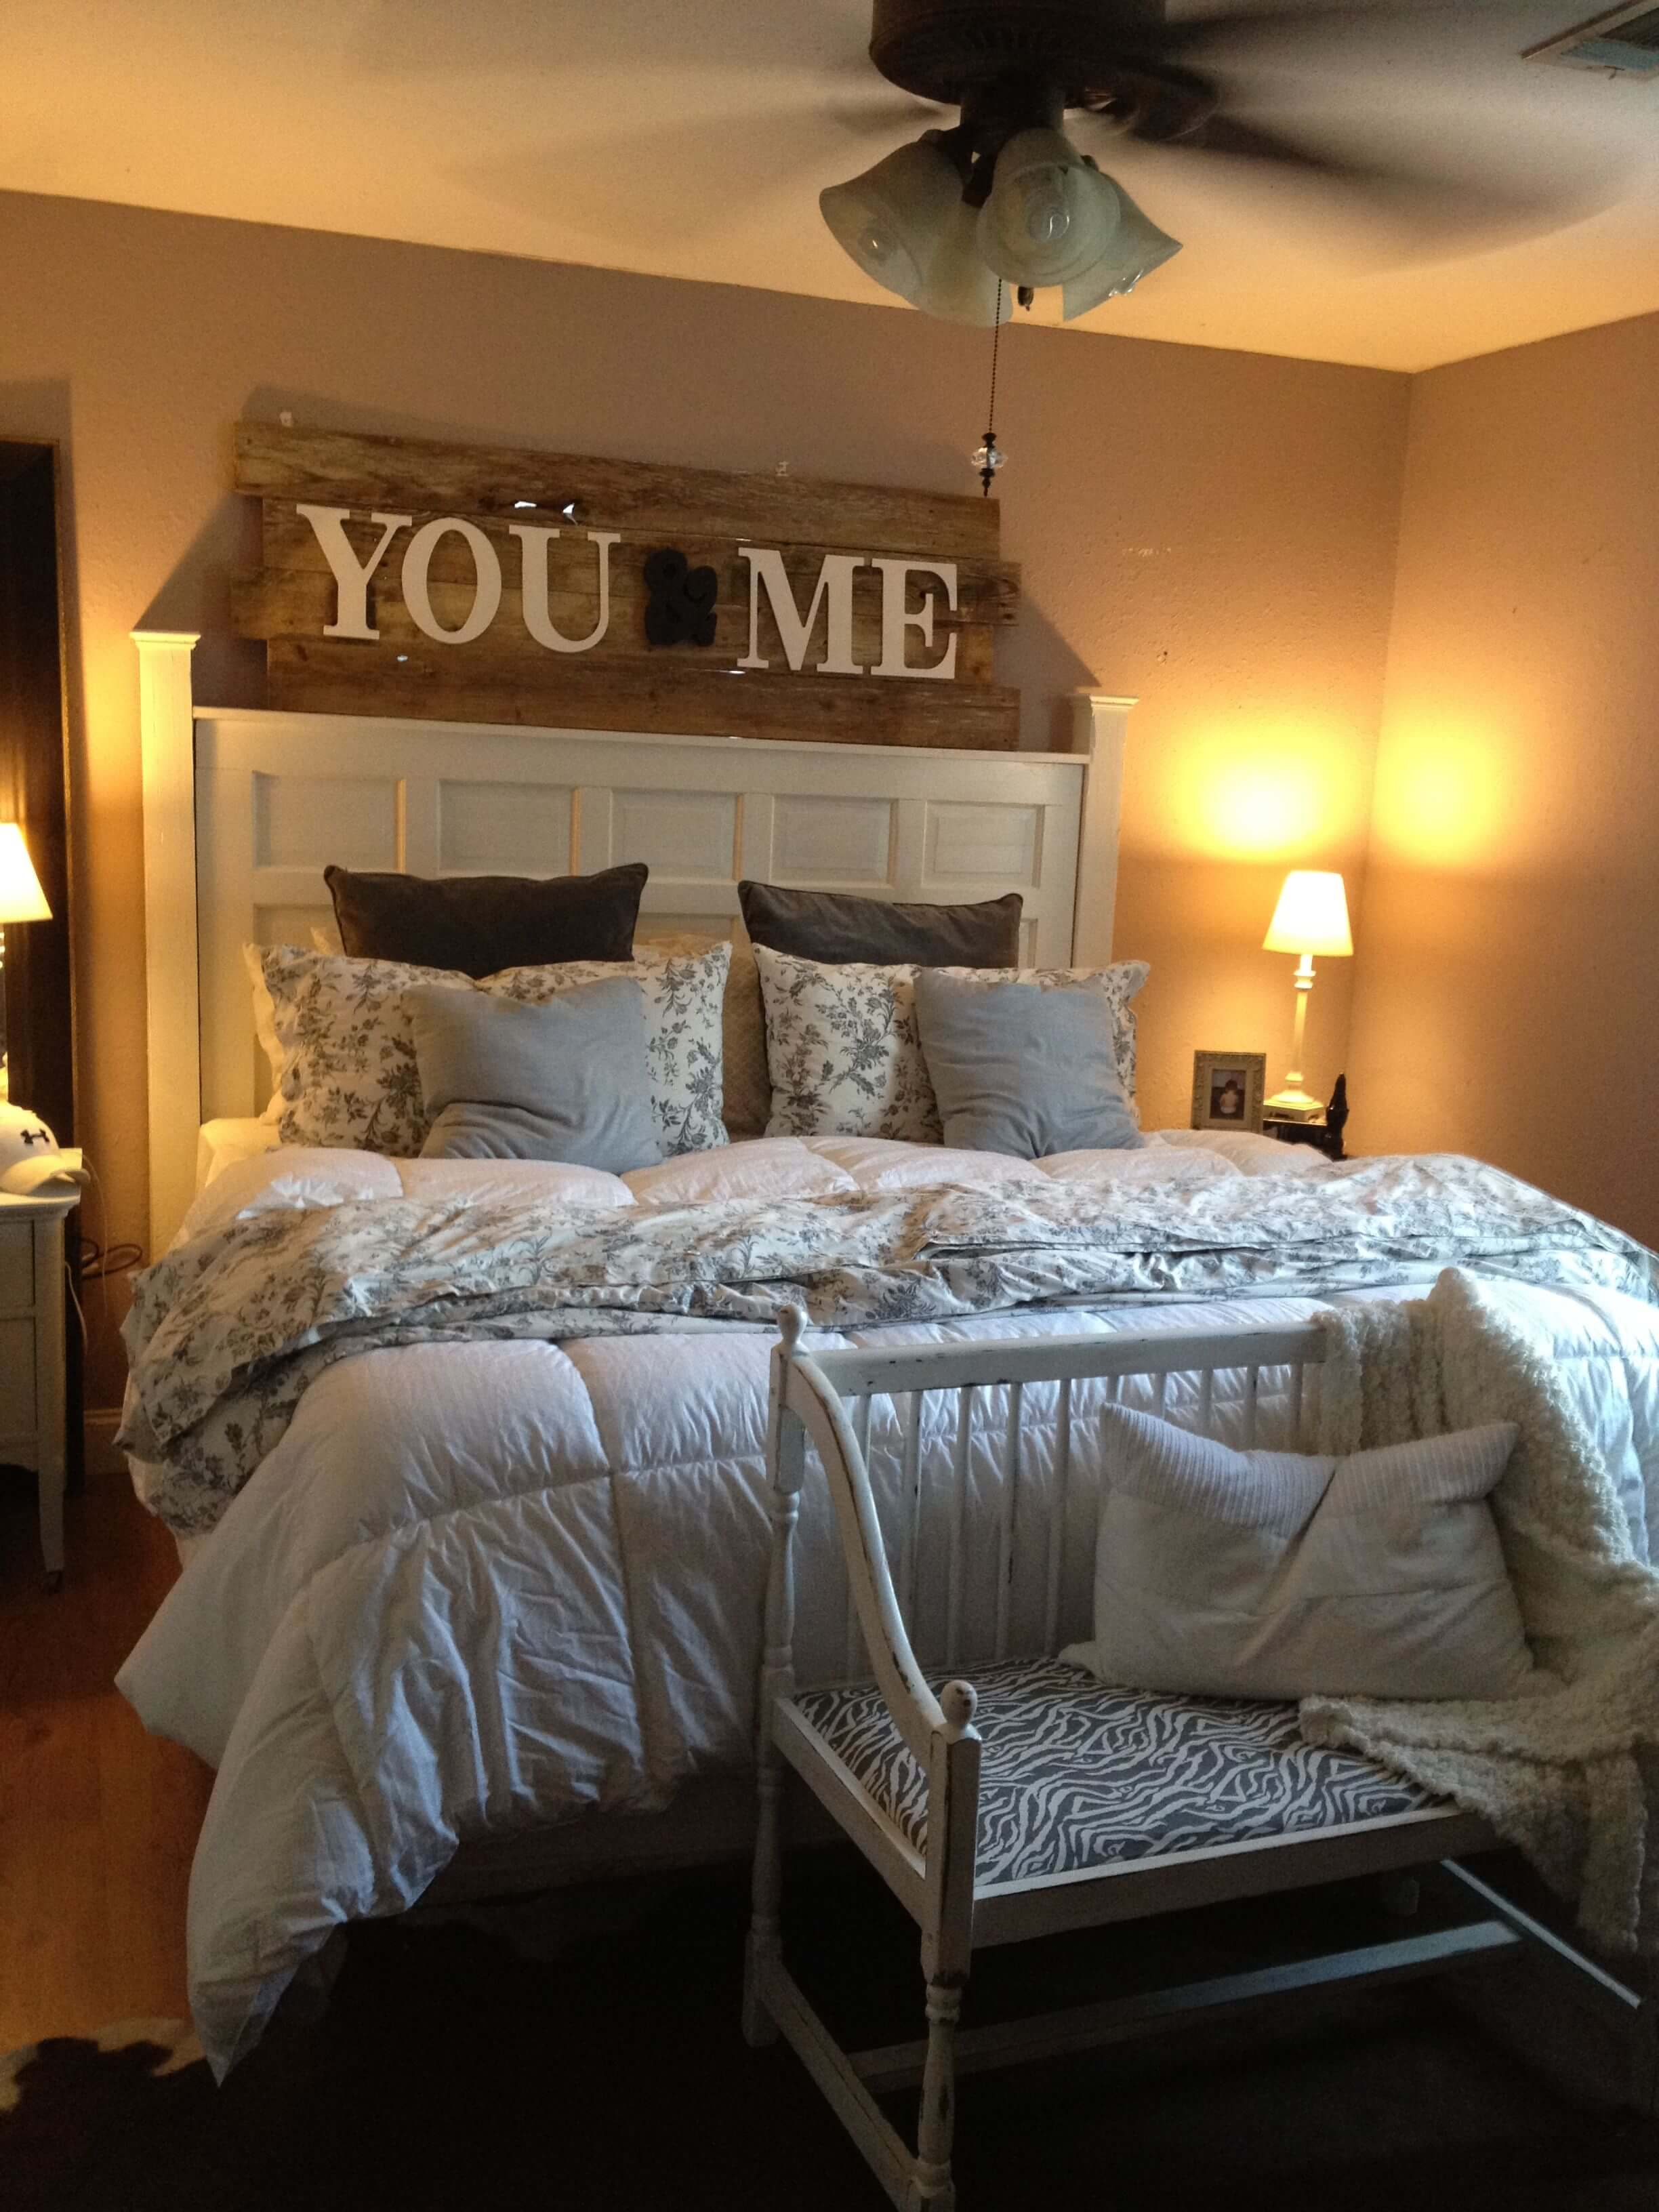 Bedroom Furniture Placement